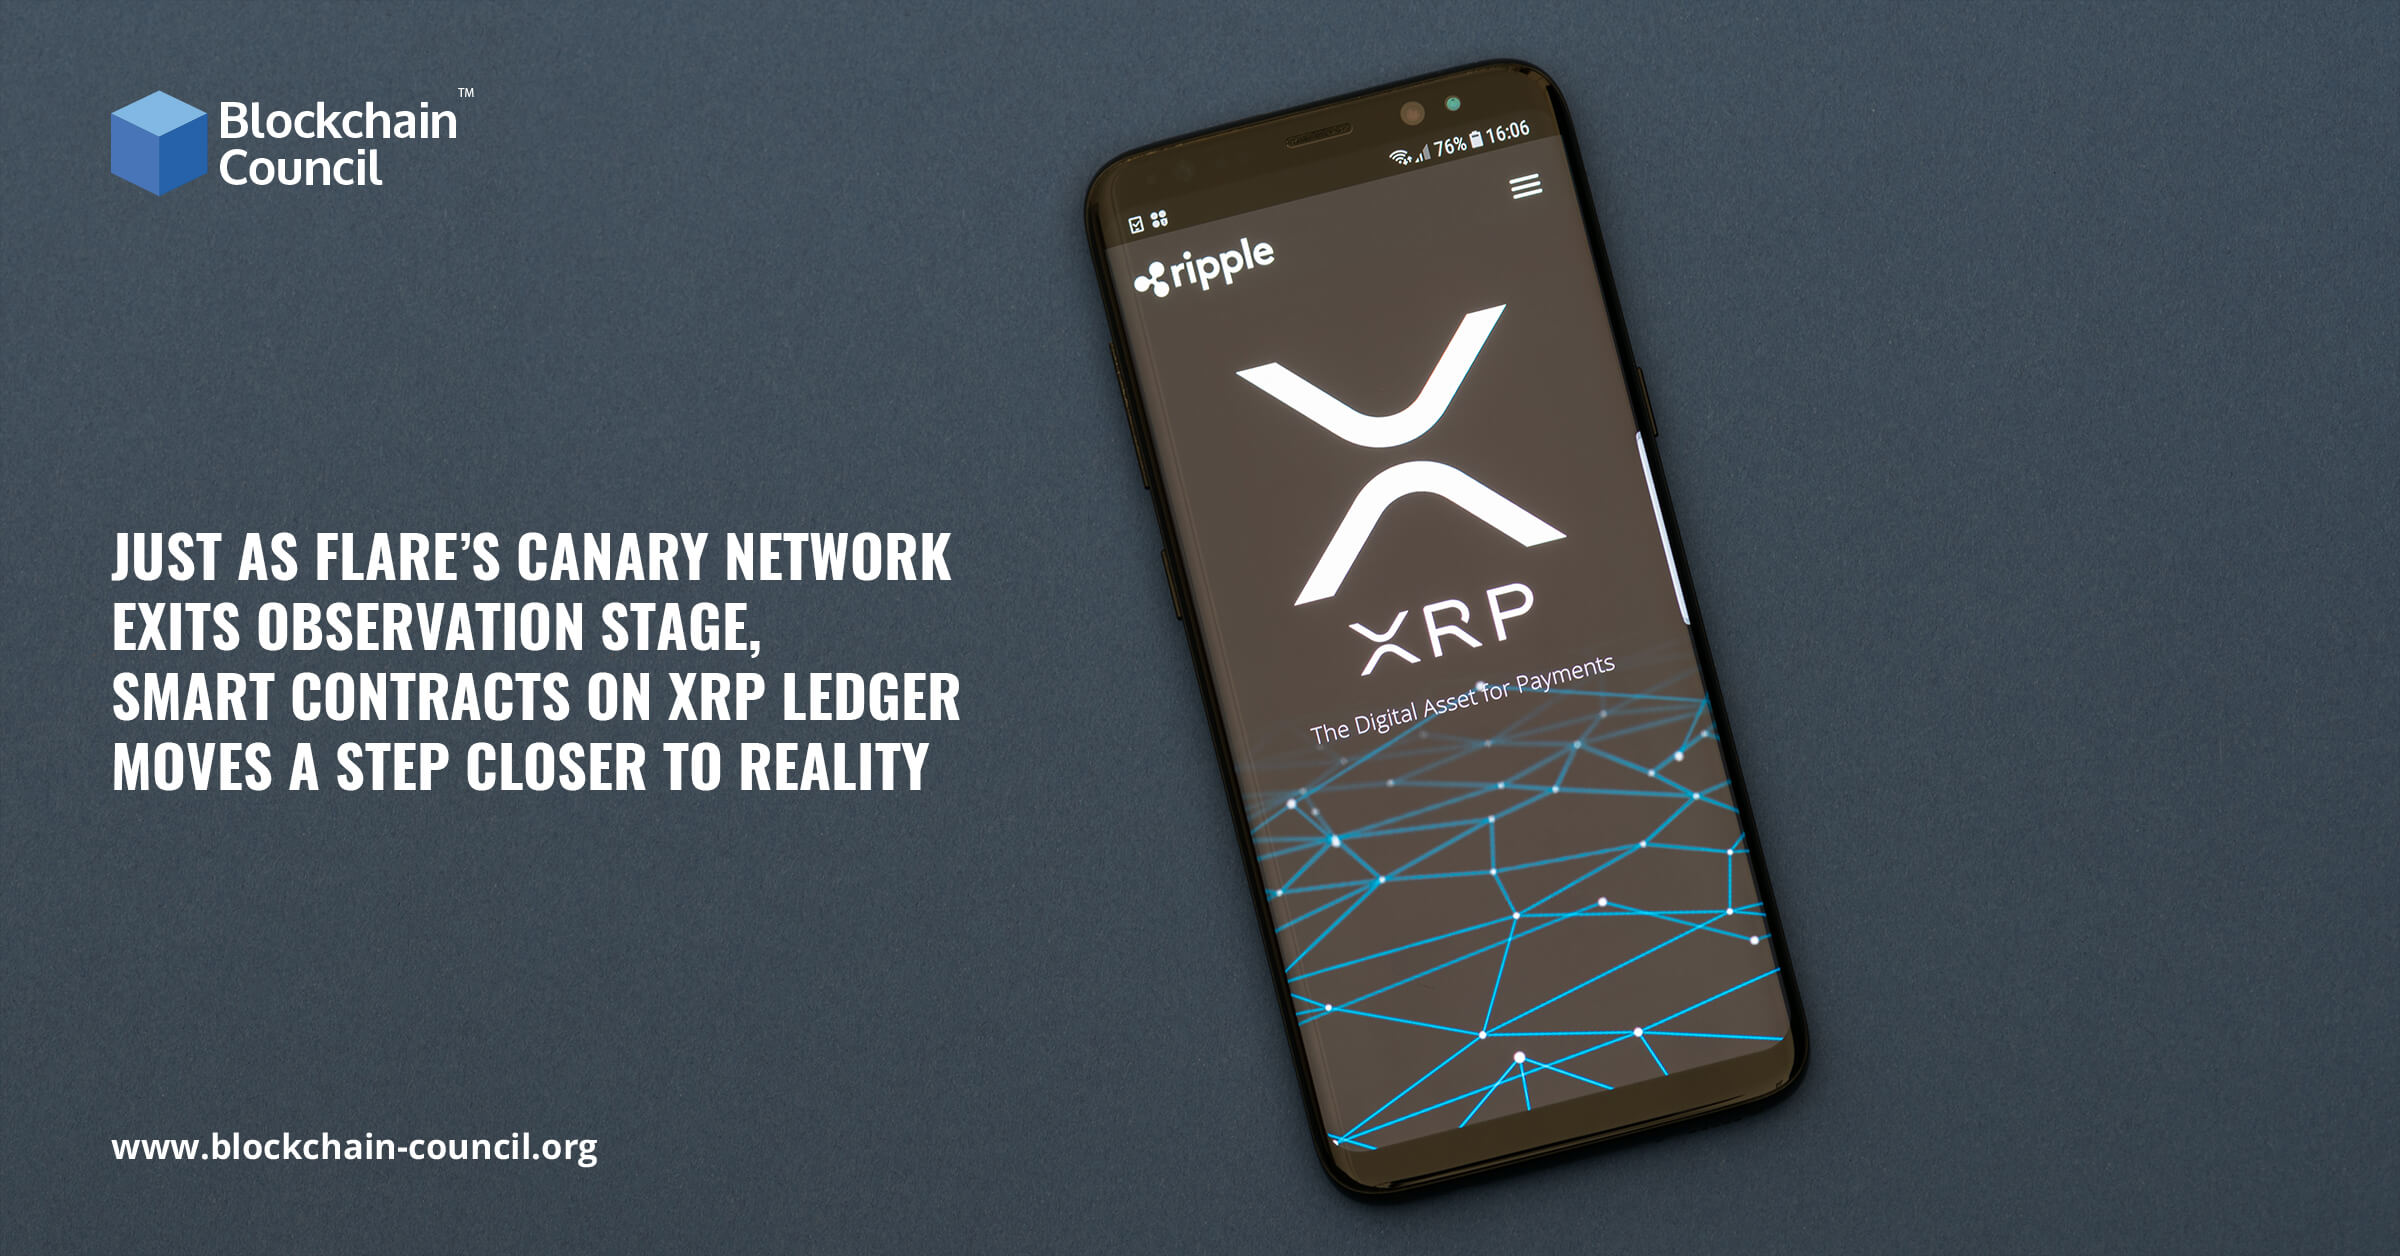 Just As Flare’s Canary Network Exits Observation Stage, Smart Contracts On XRP Ledger Moves A Step Closer To Reality